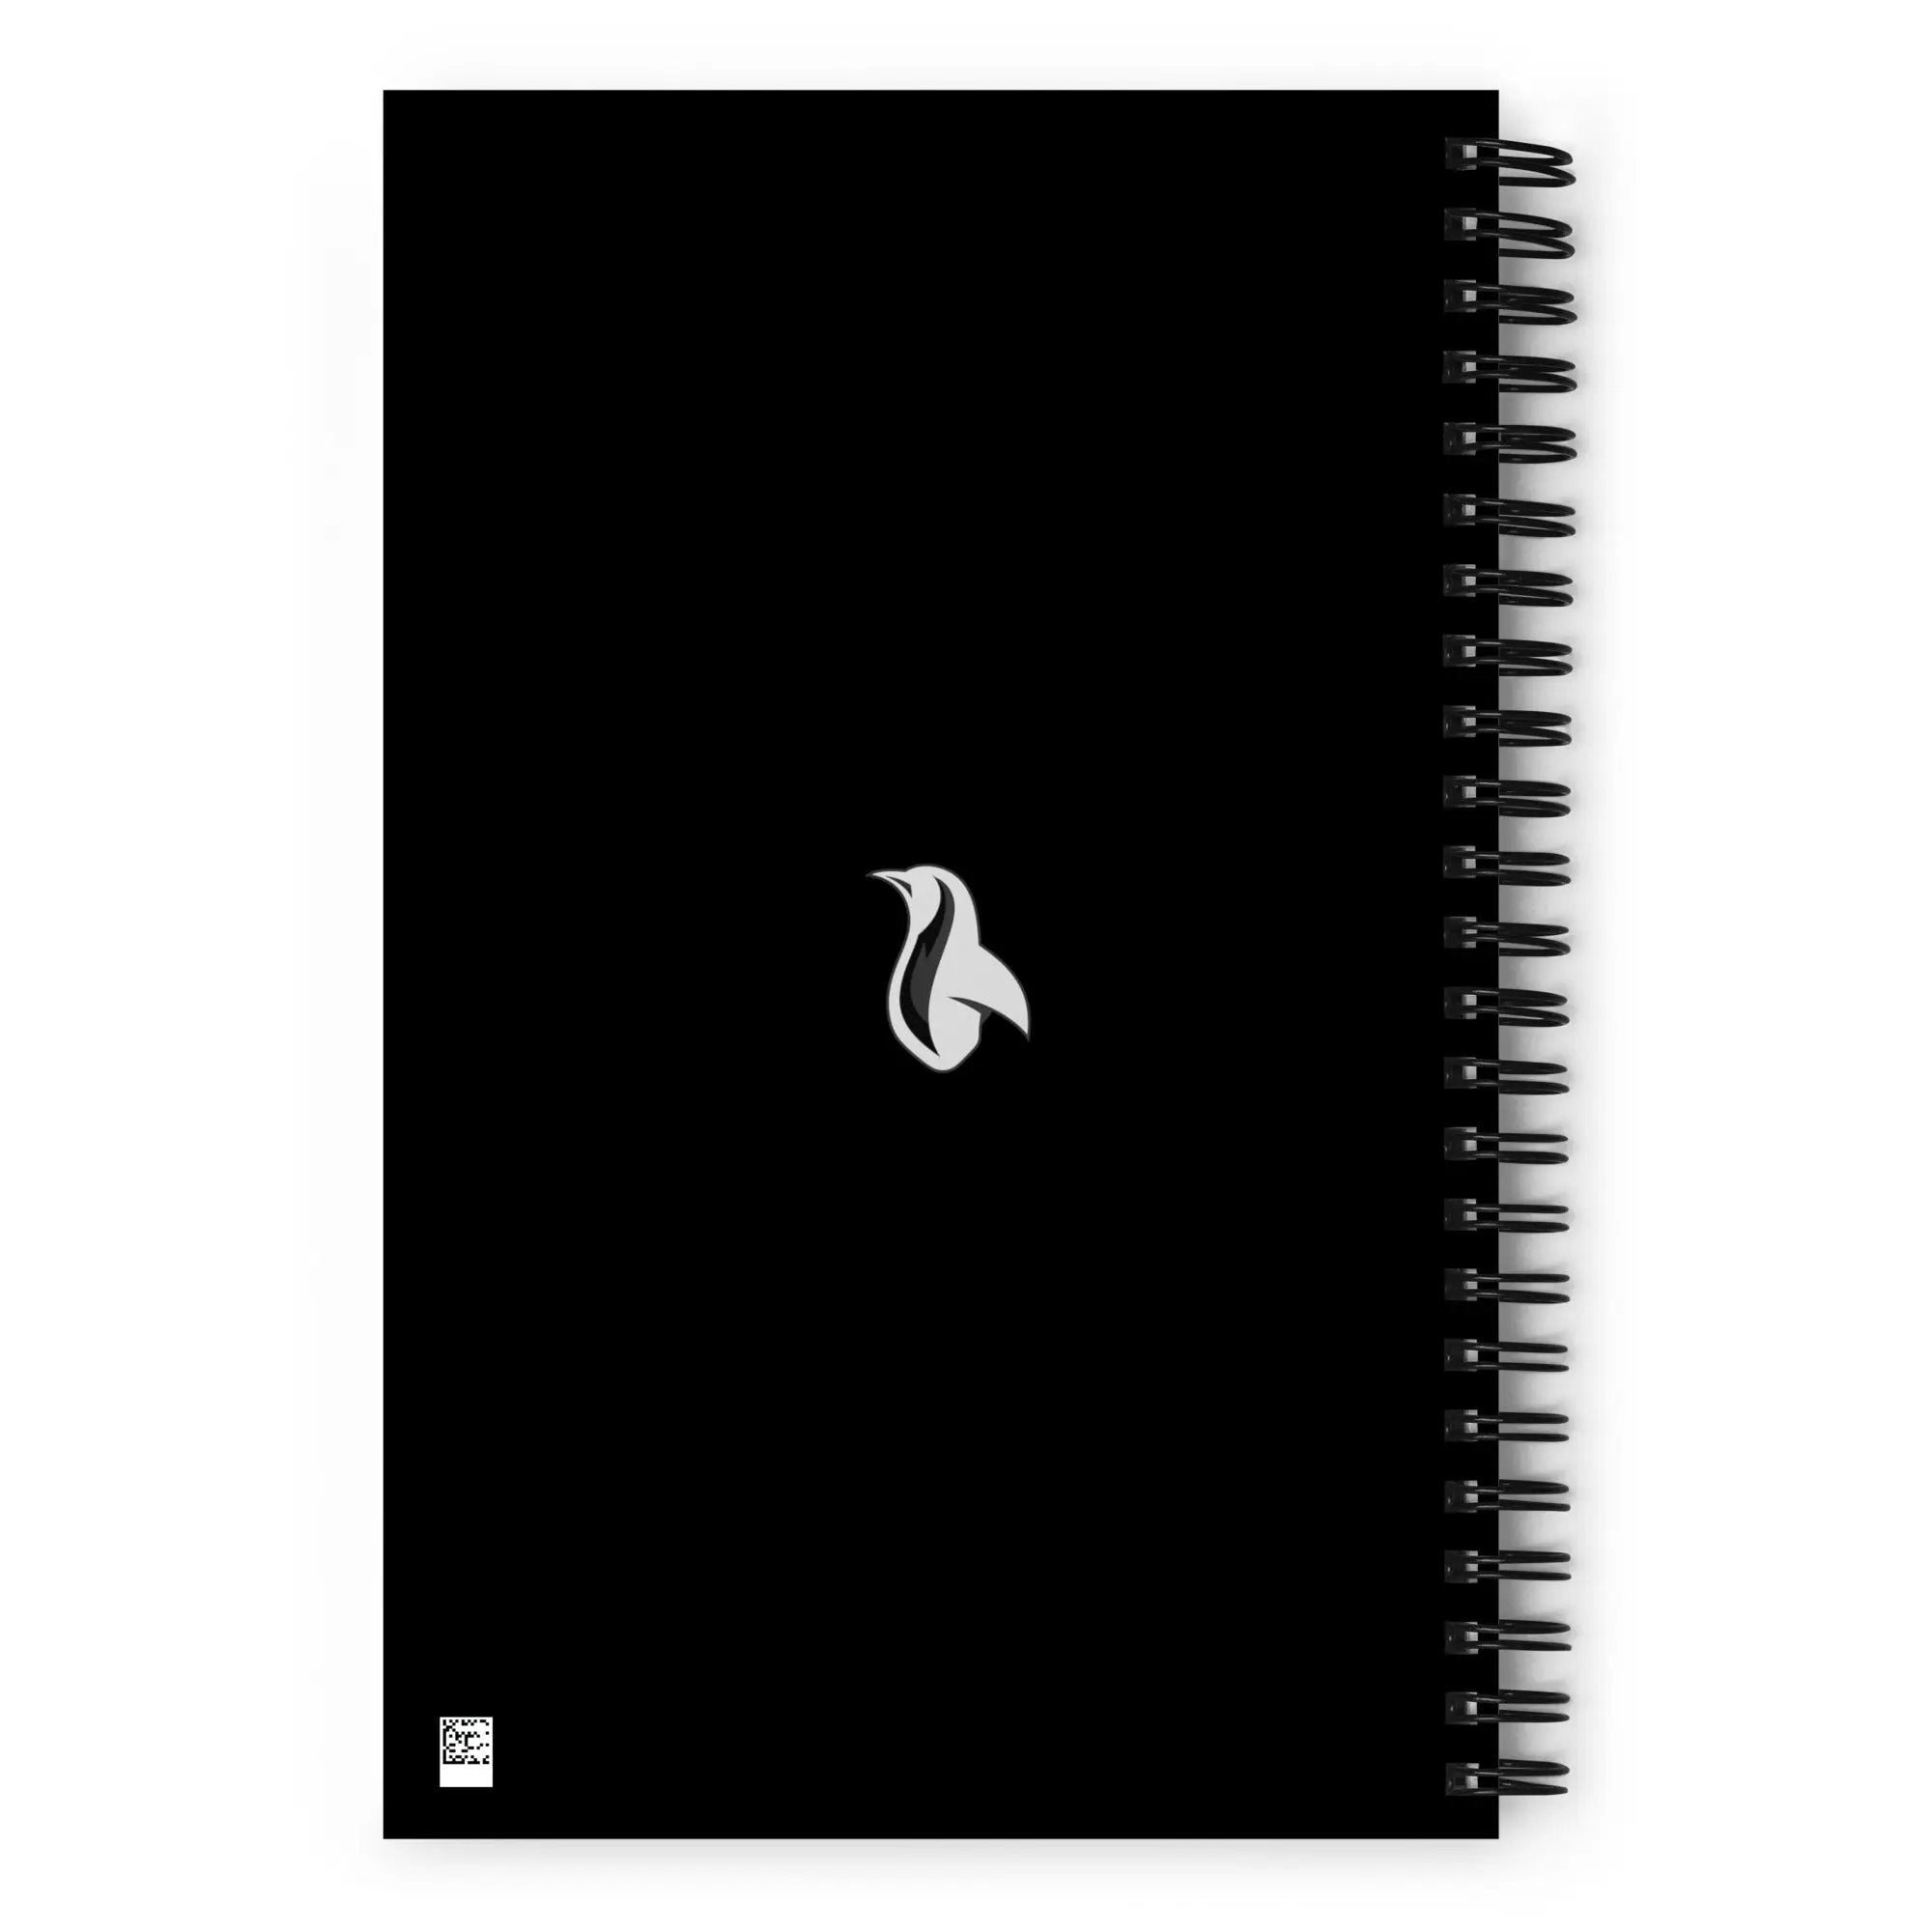 The Monster Squad "The Creature" Spiral Notebook